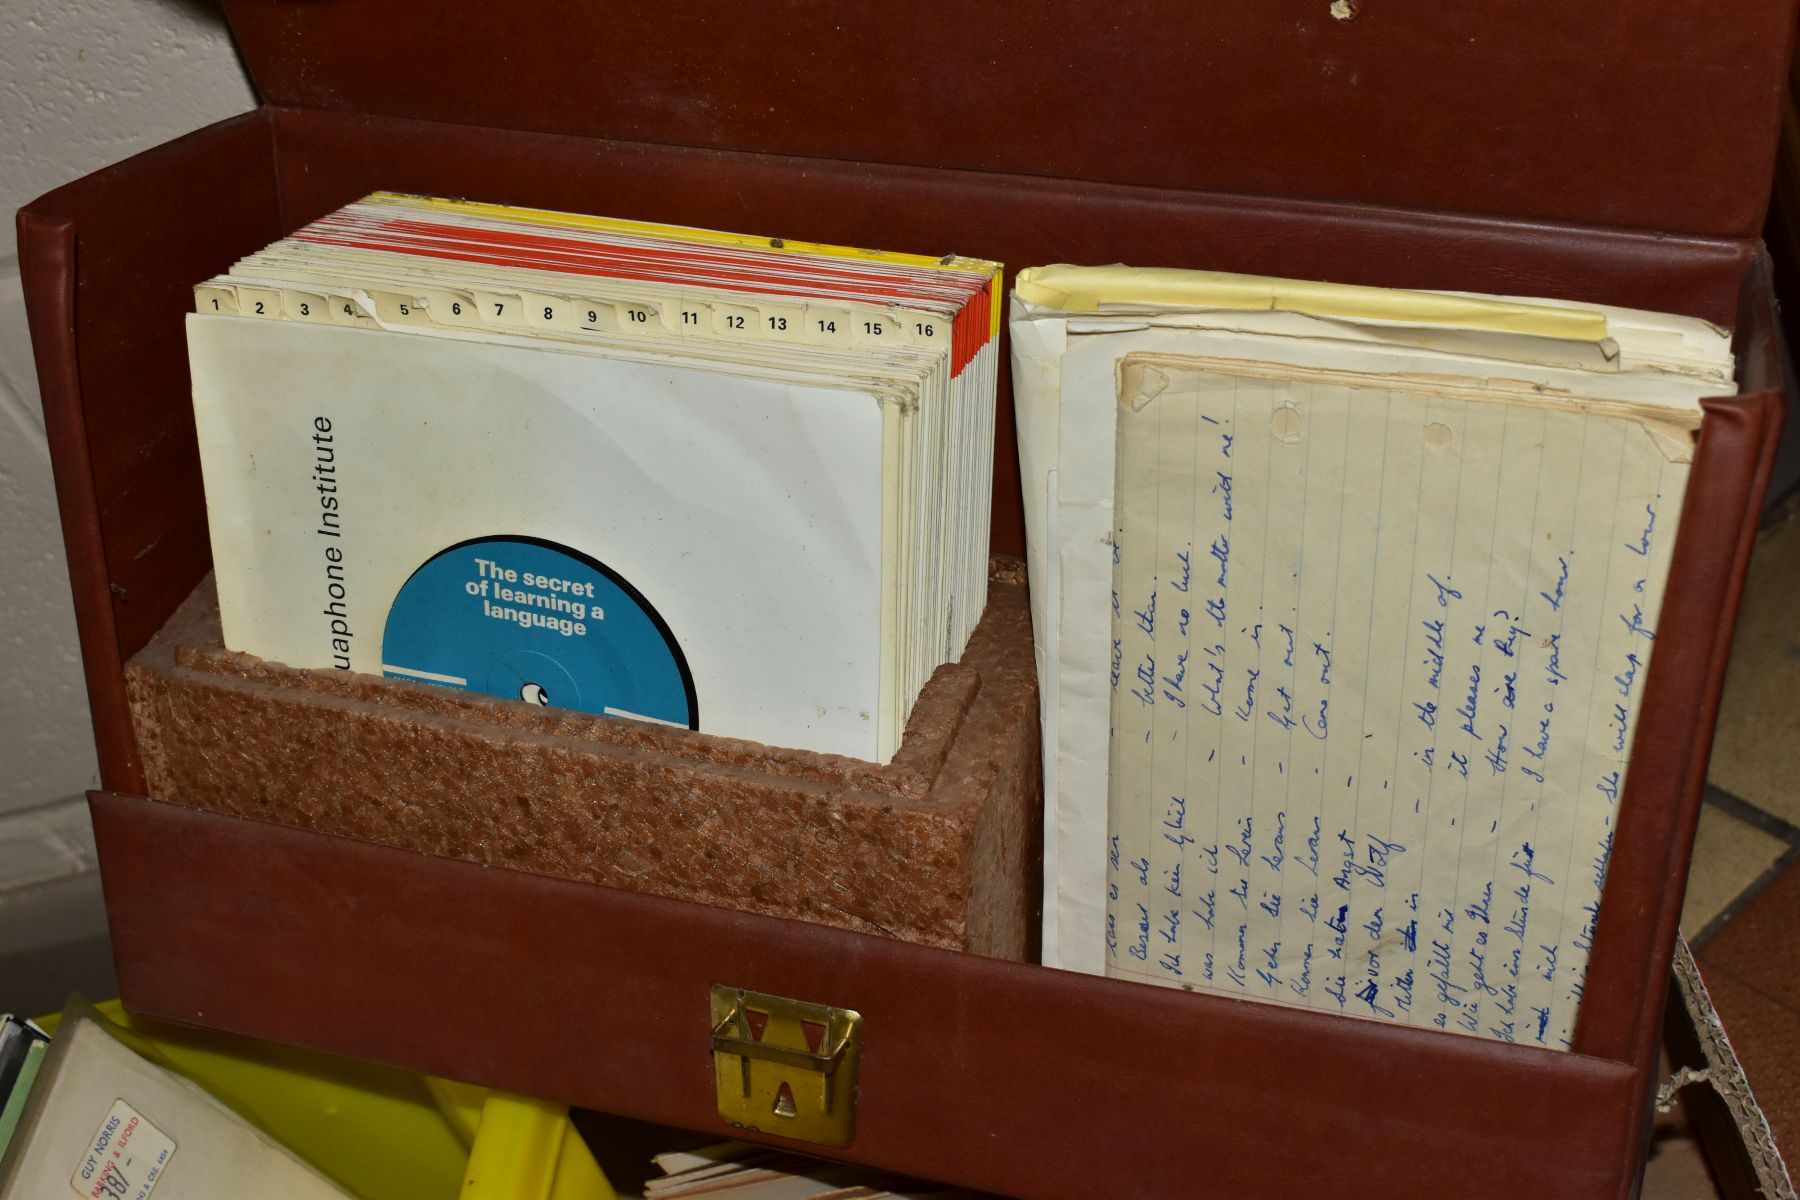 A CASE OF LINGUAPHONE SINGLES AND TWO BOXES OF LPs AND SINGLES, including three sleeves of 'Living - Image 4 of 4